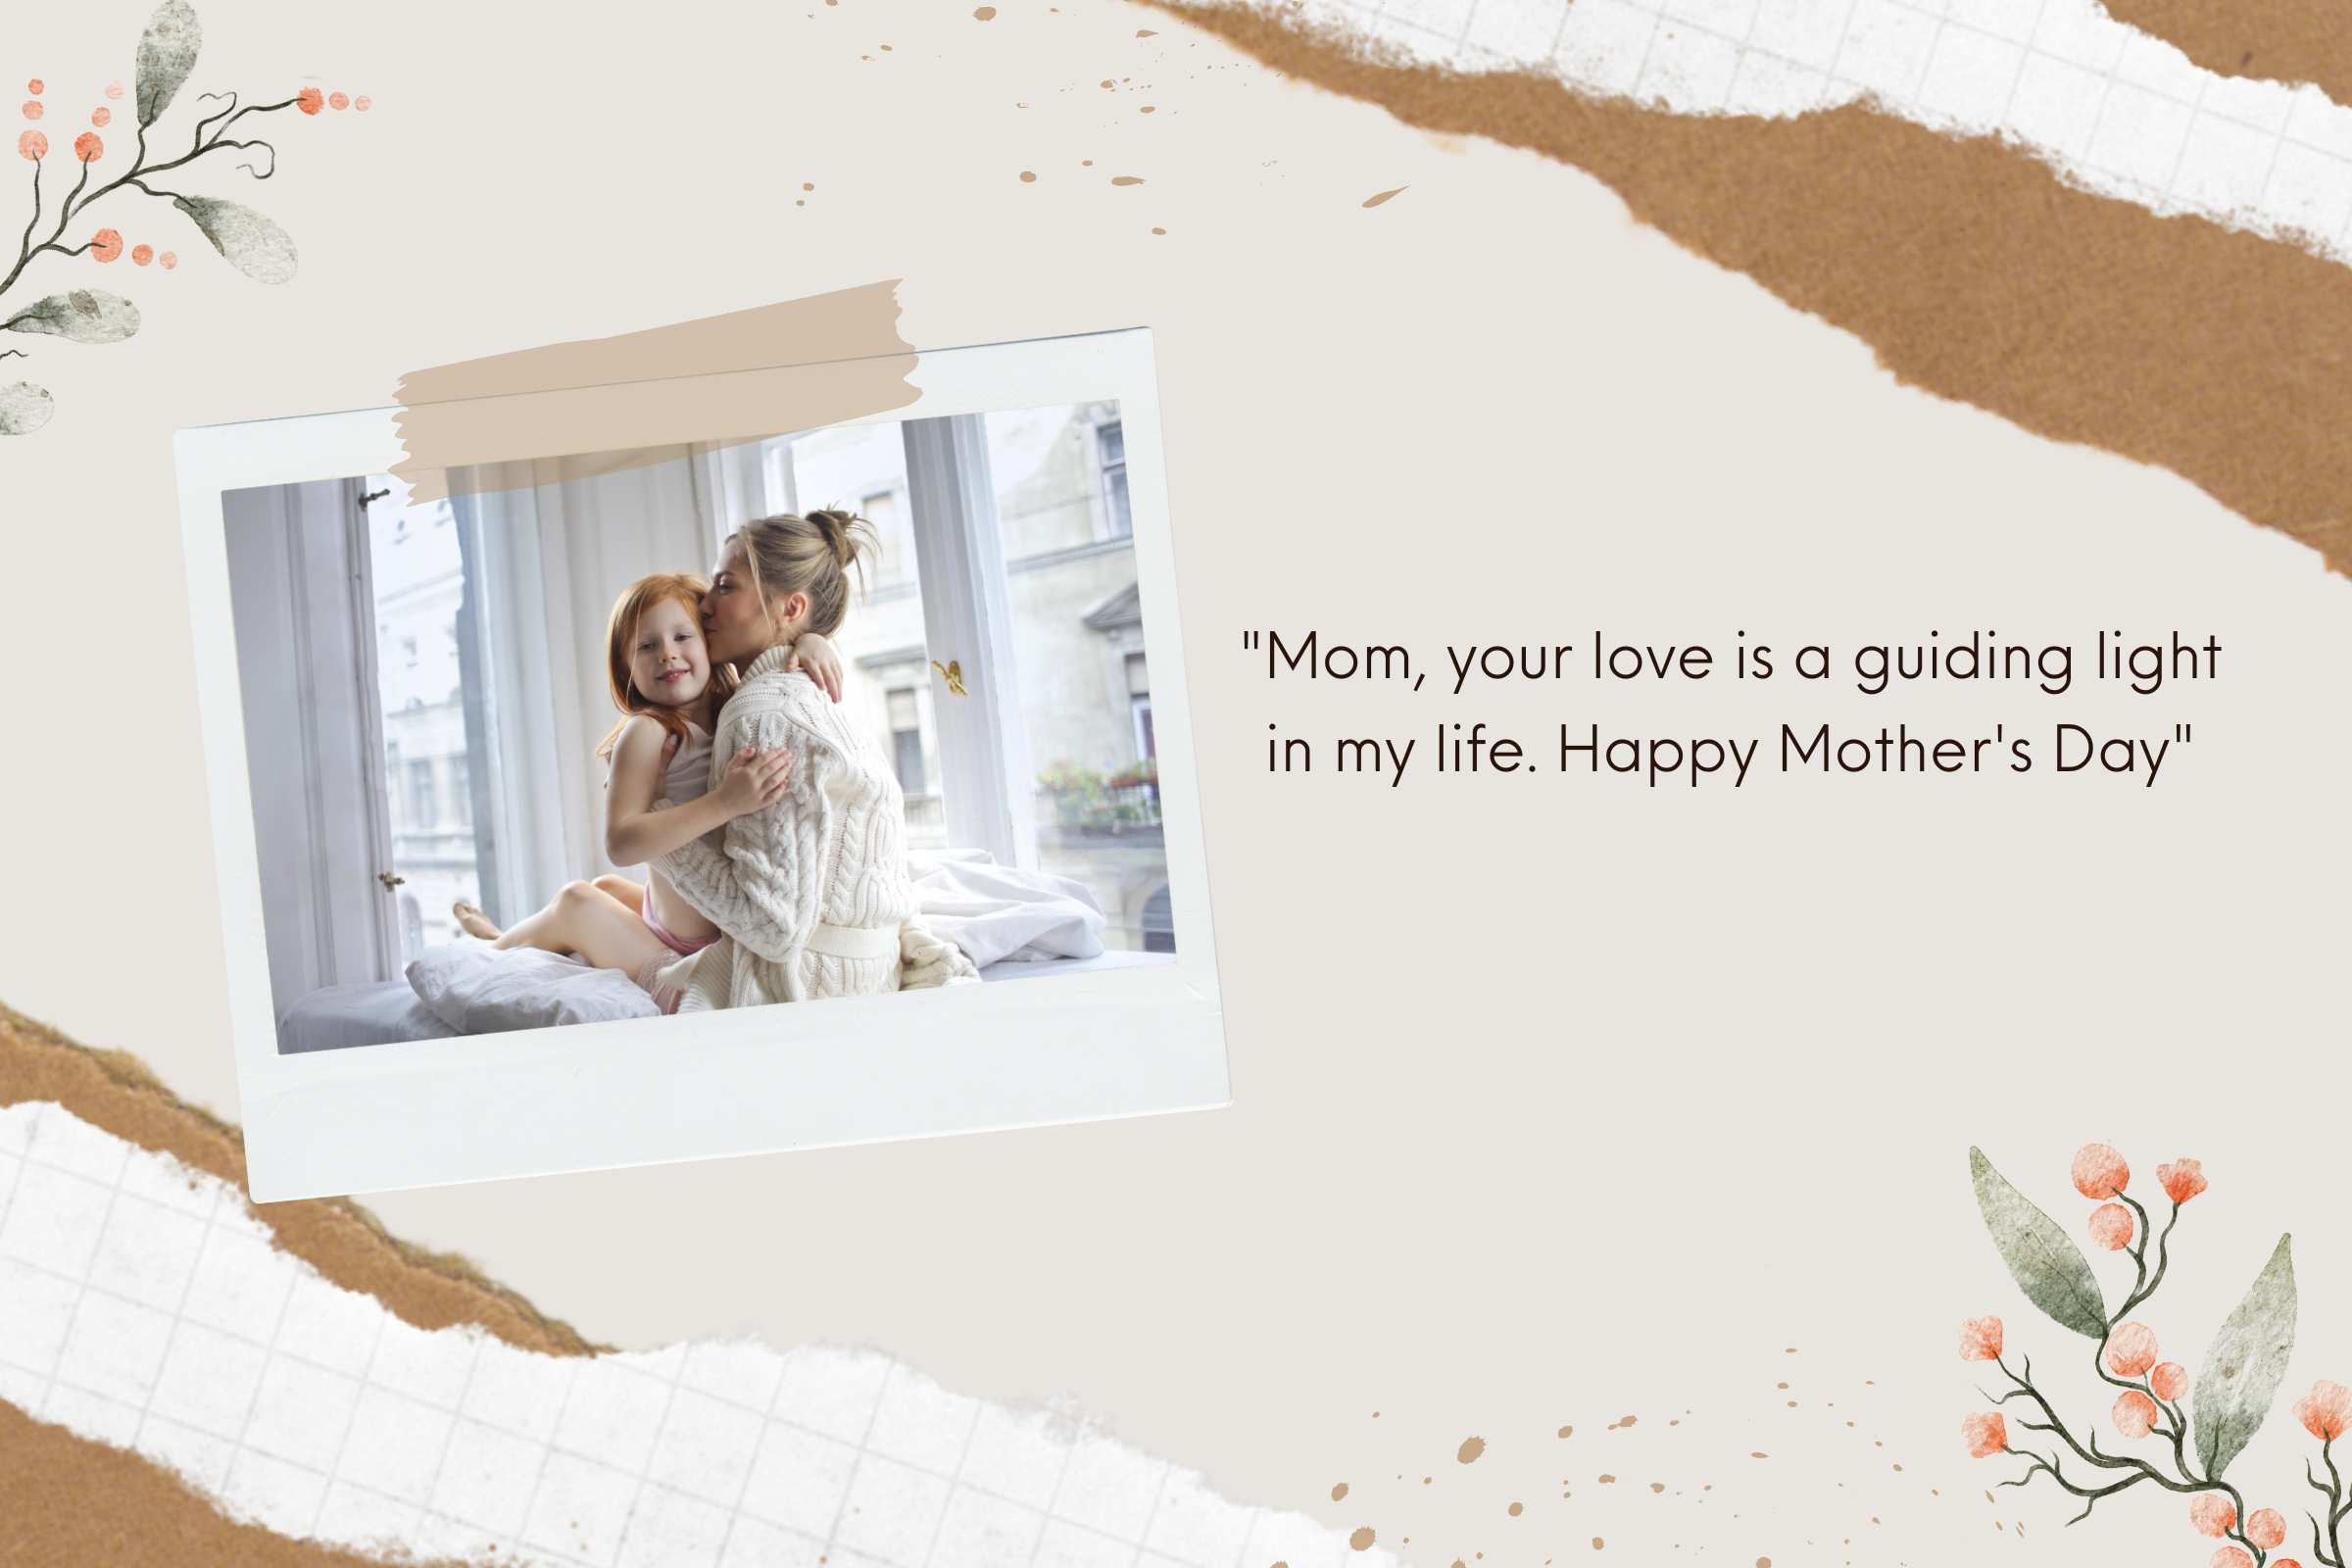 70+ Happy touching Messages for Mother's Day from Daughter